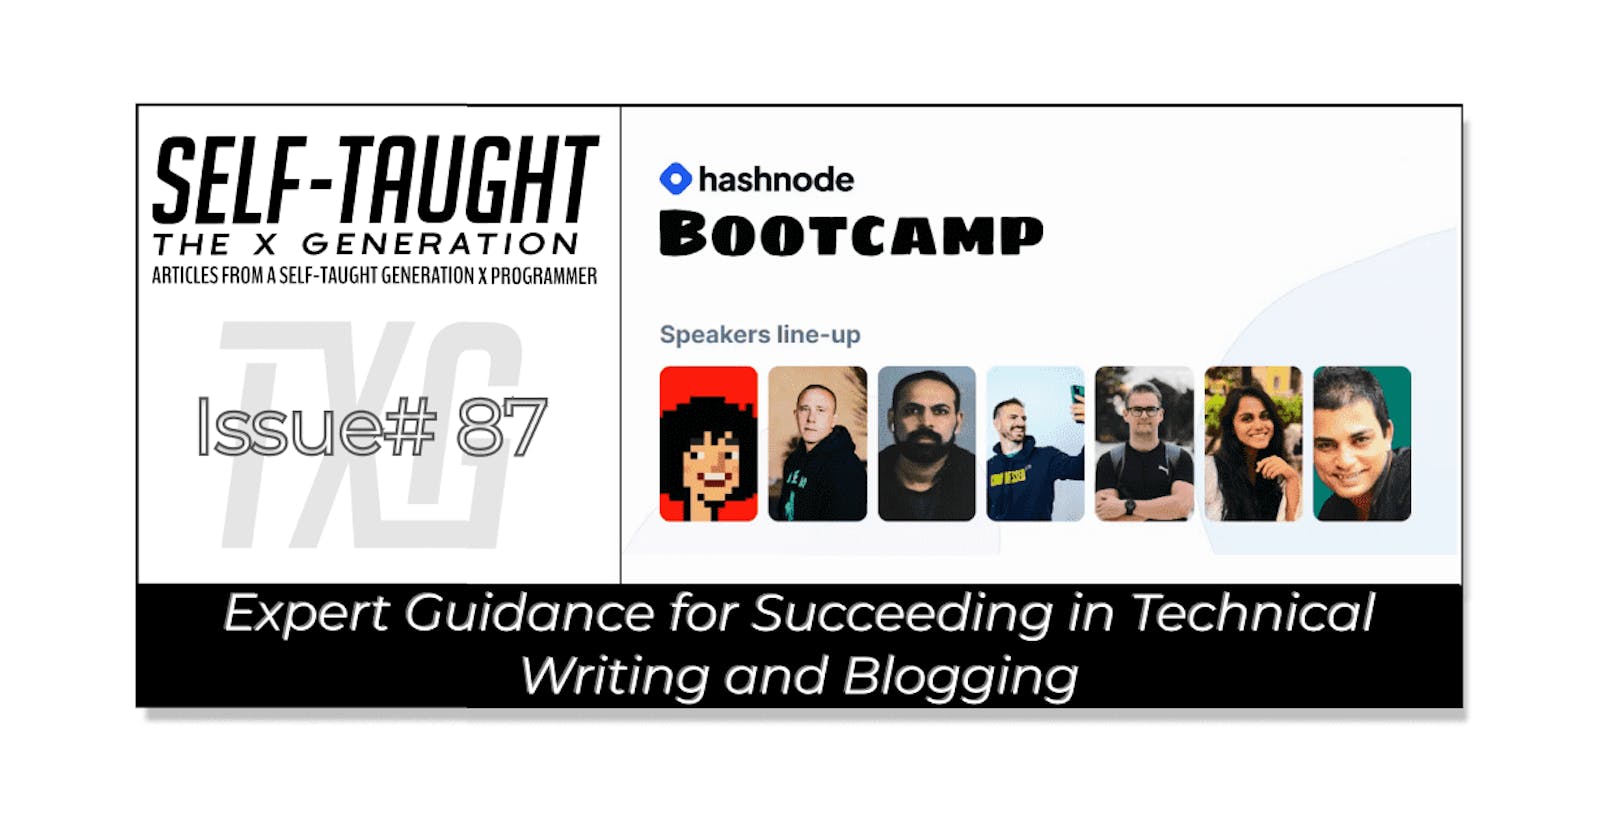 Expert Guidance for Succeeding in Technical Writing and Blogging